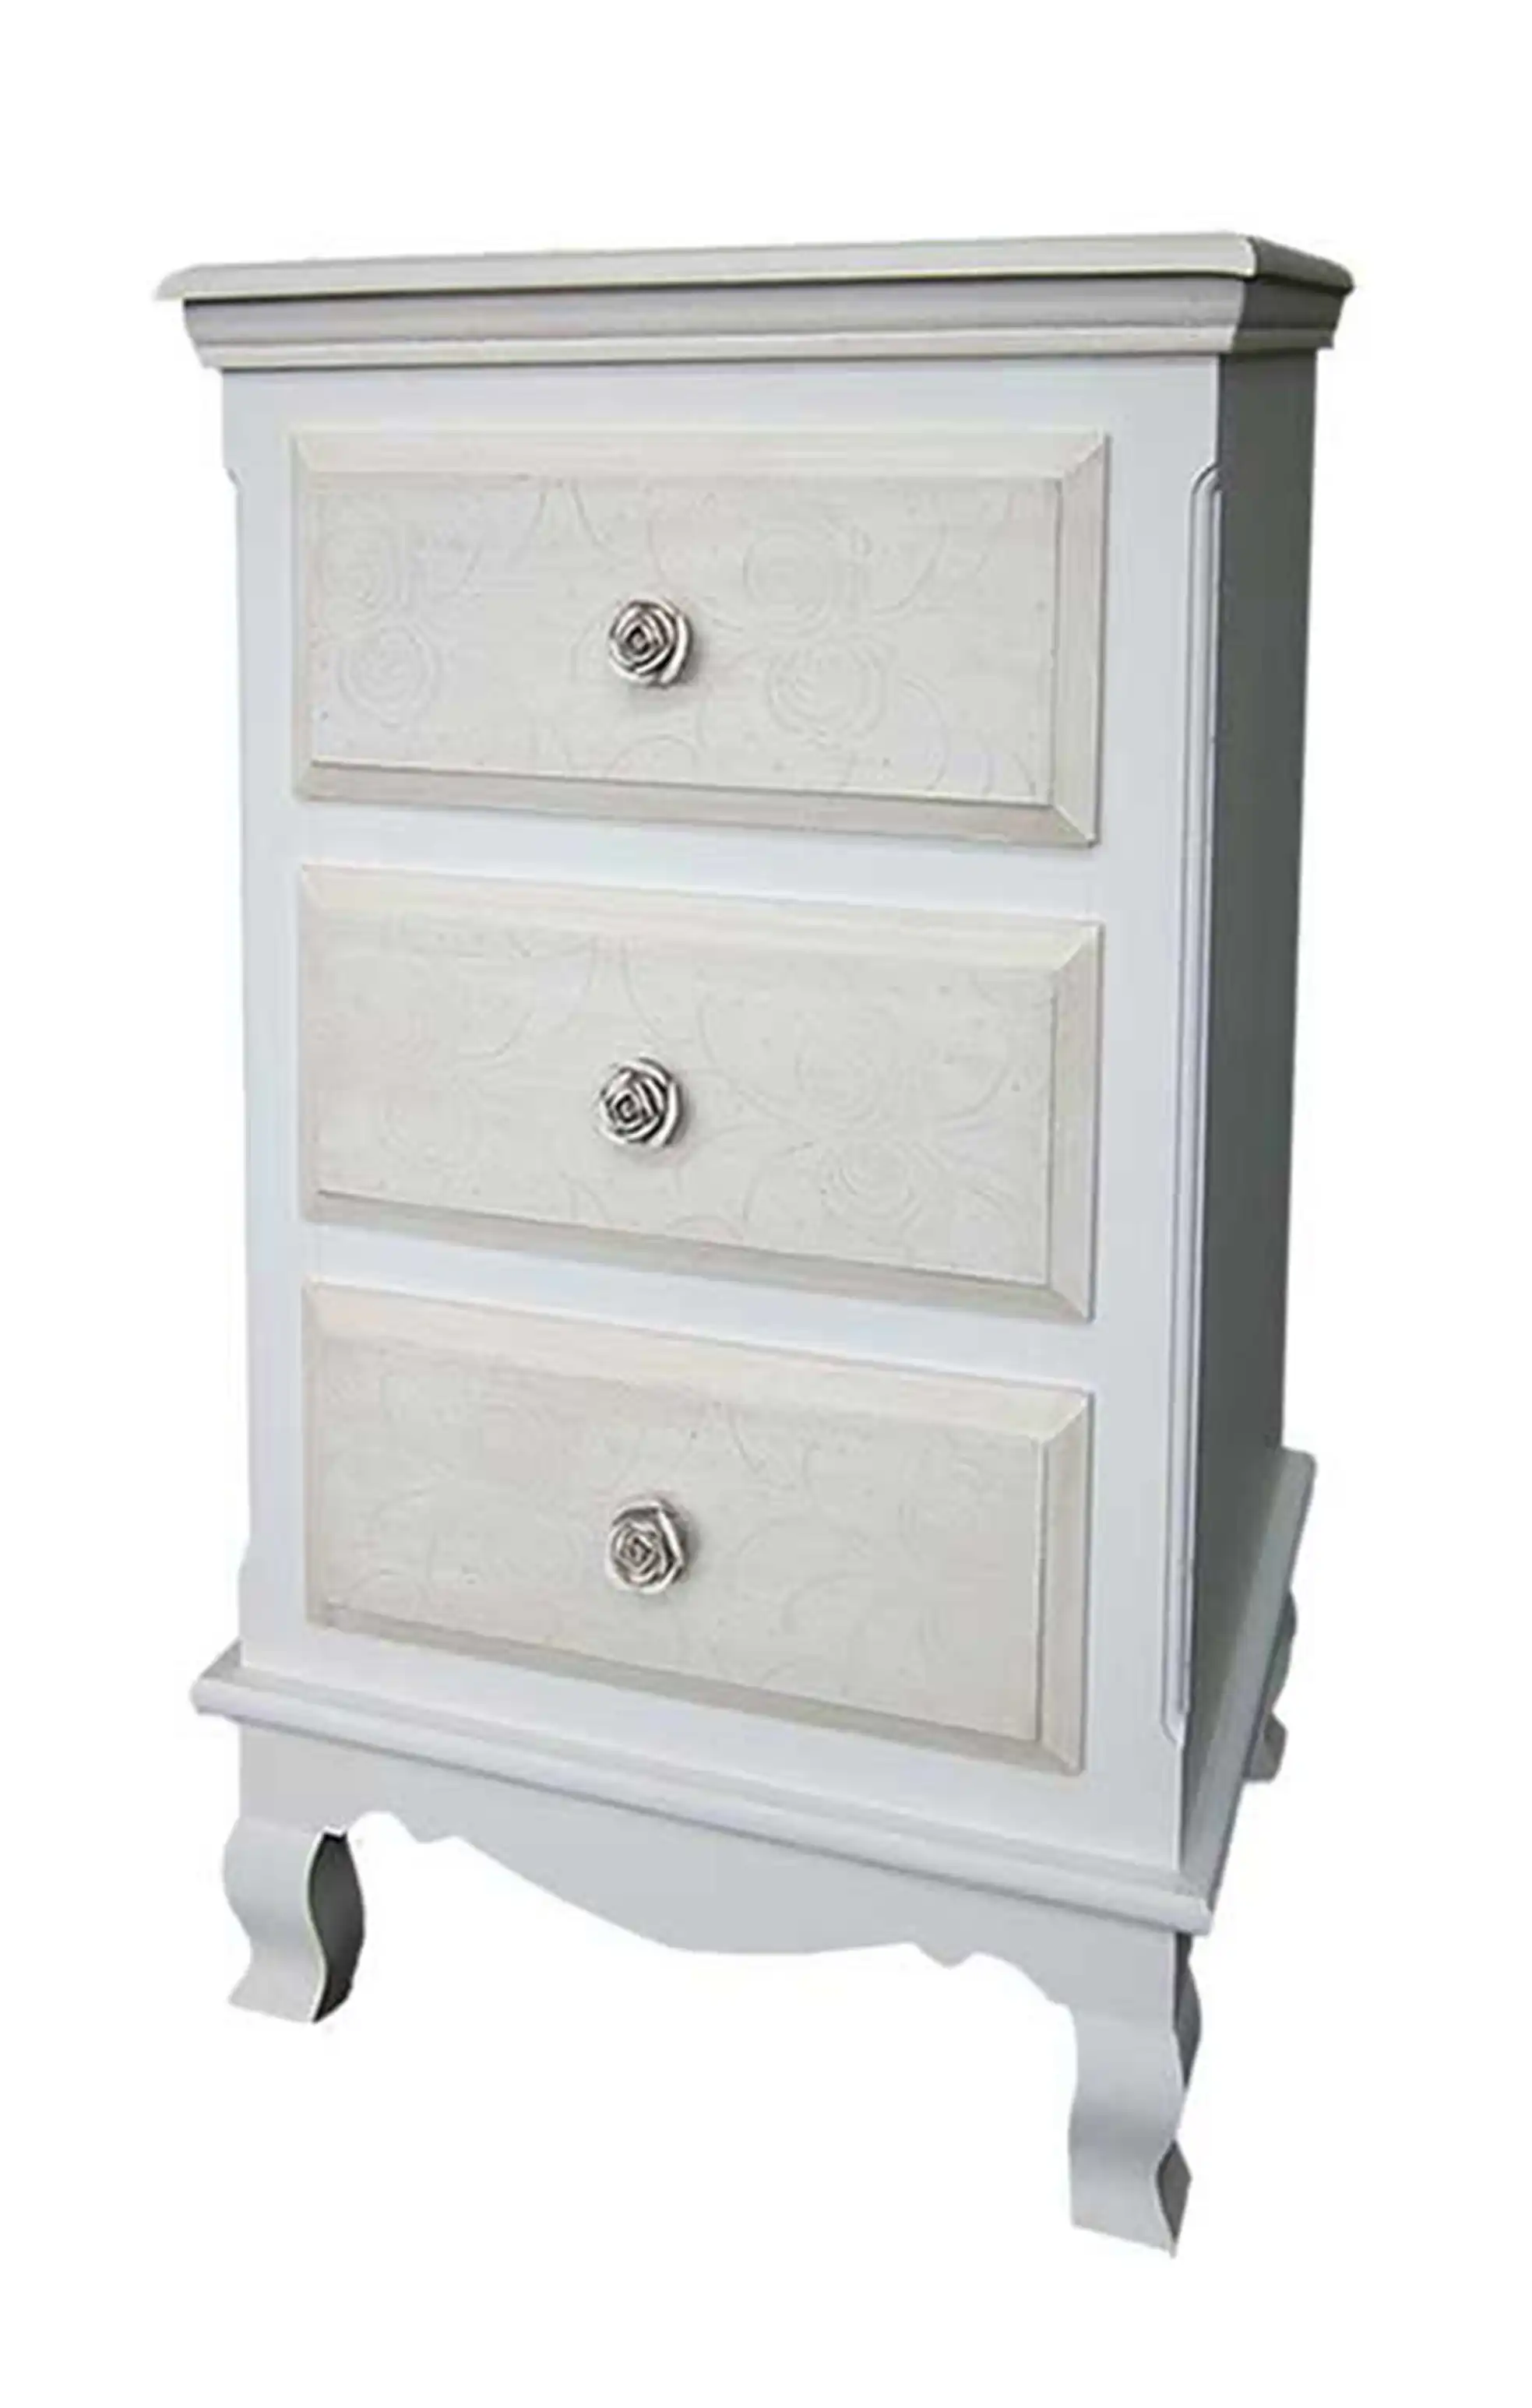 Drawers Chest with 3 drawers - popular handicrafts